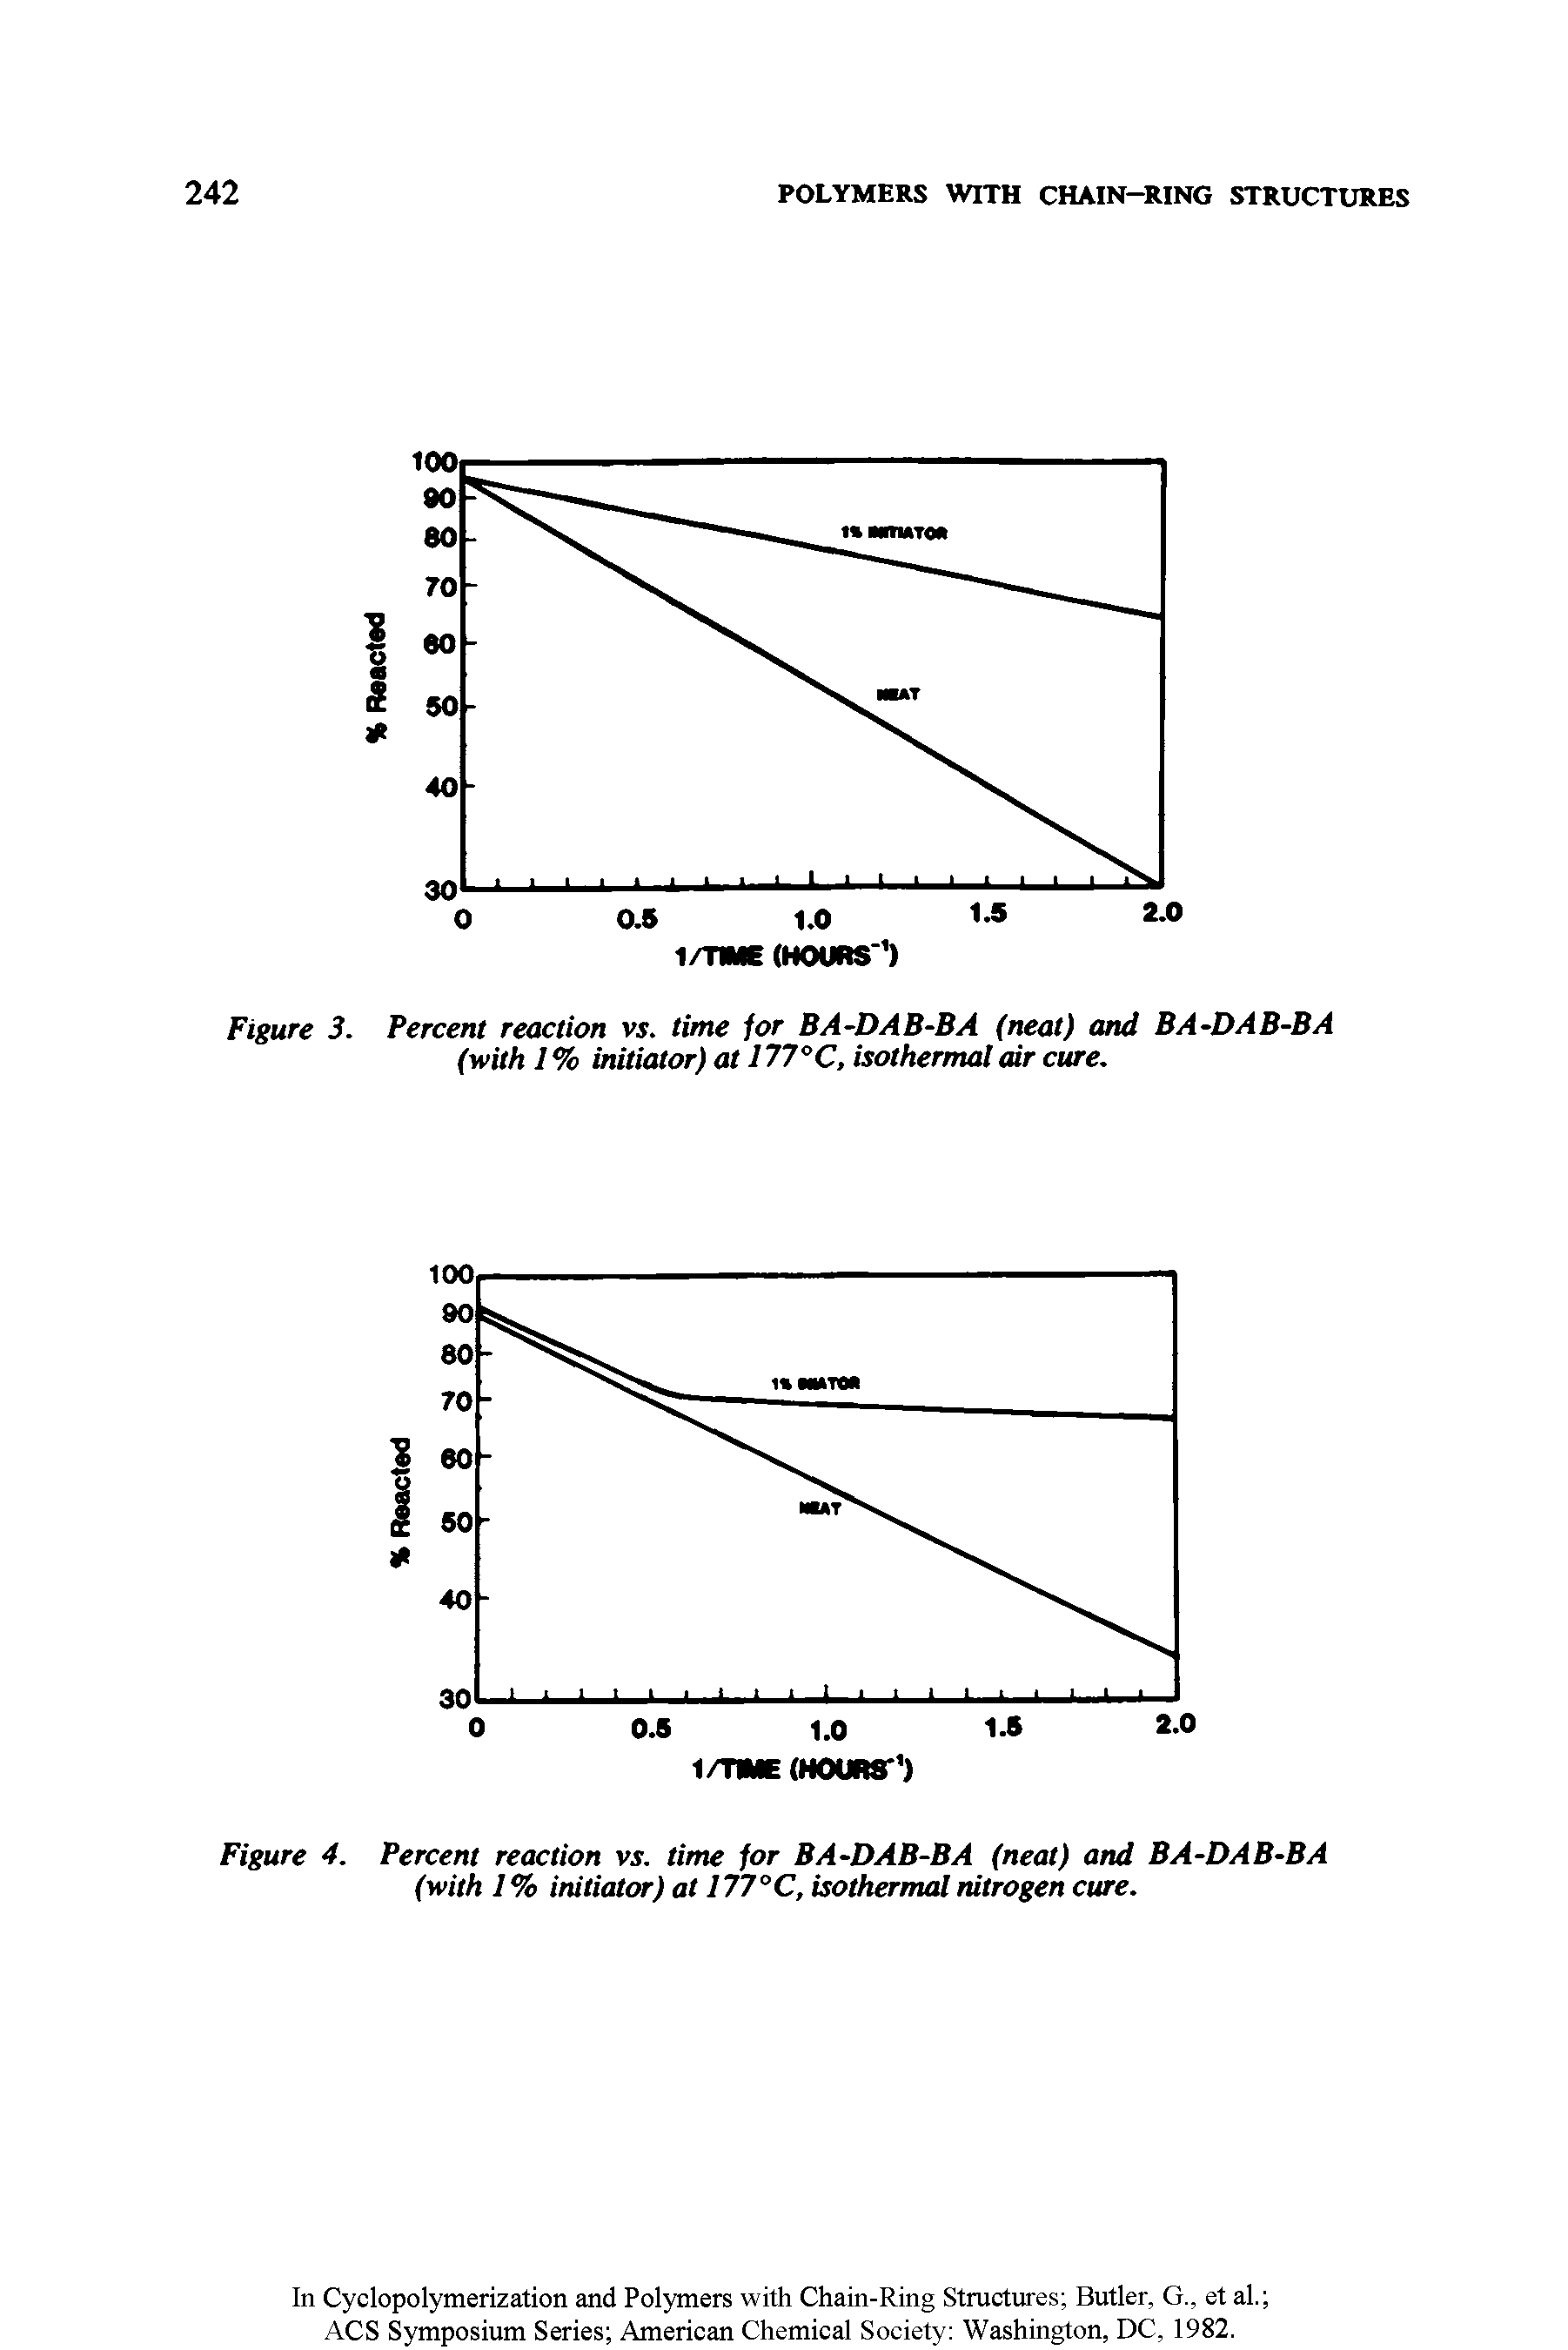 Figure 4. Percent reaction vs. time for BA-DAB-BA (neat) and BA-DAB-BA (with 1% initiator) at 177°C, isothermal nitrogen cure.